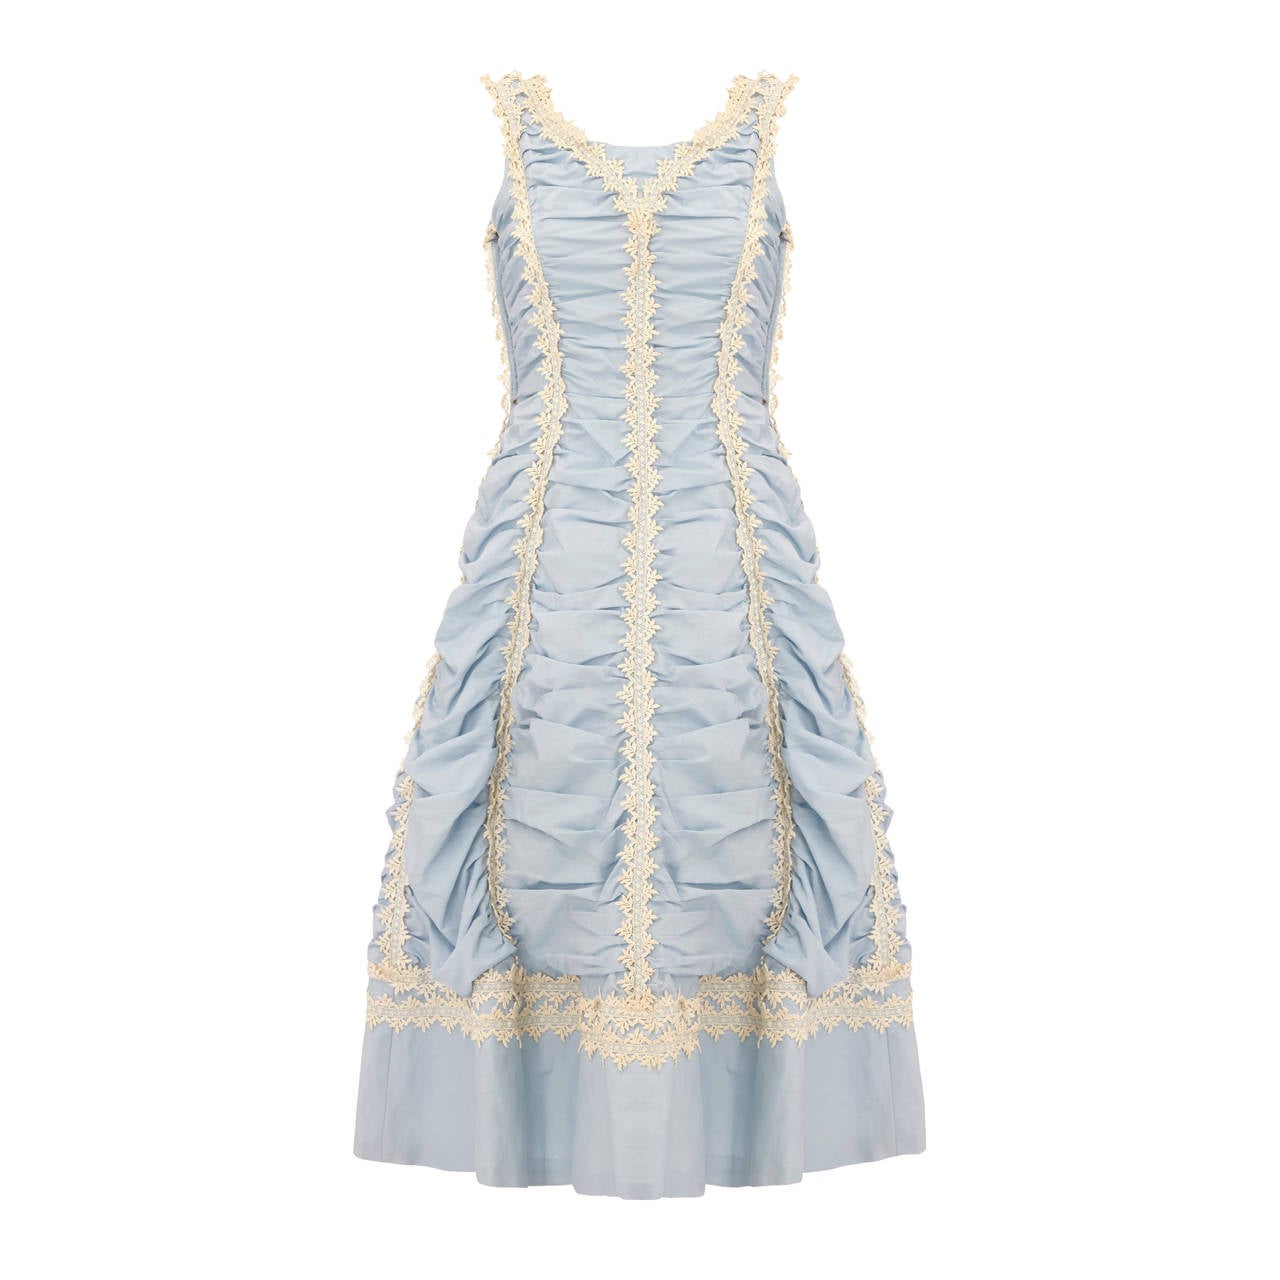 1950s Ruched Pale Blue Dress with Crochet Lace